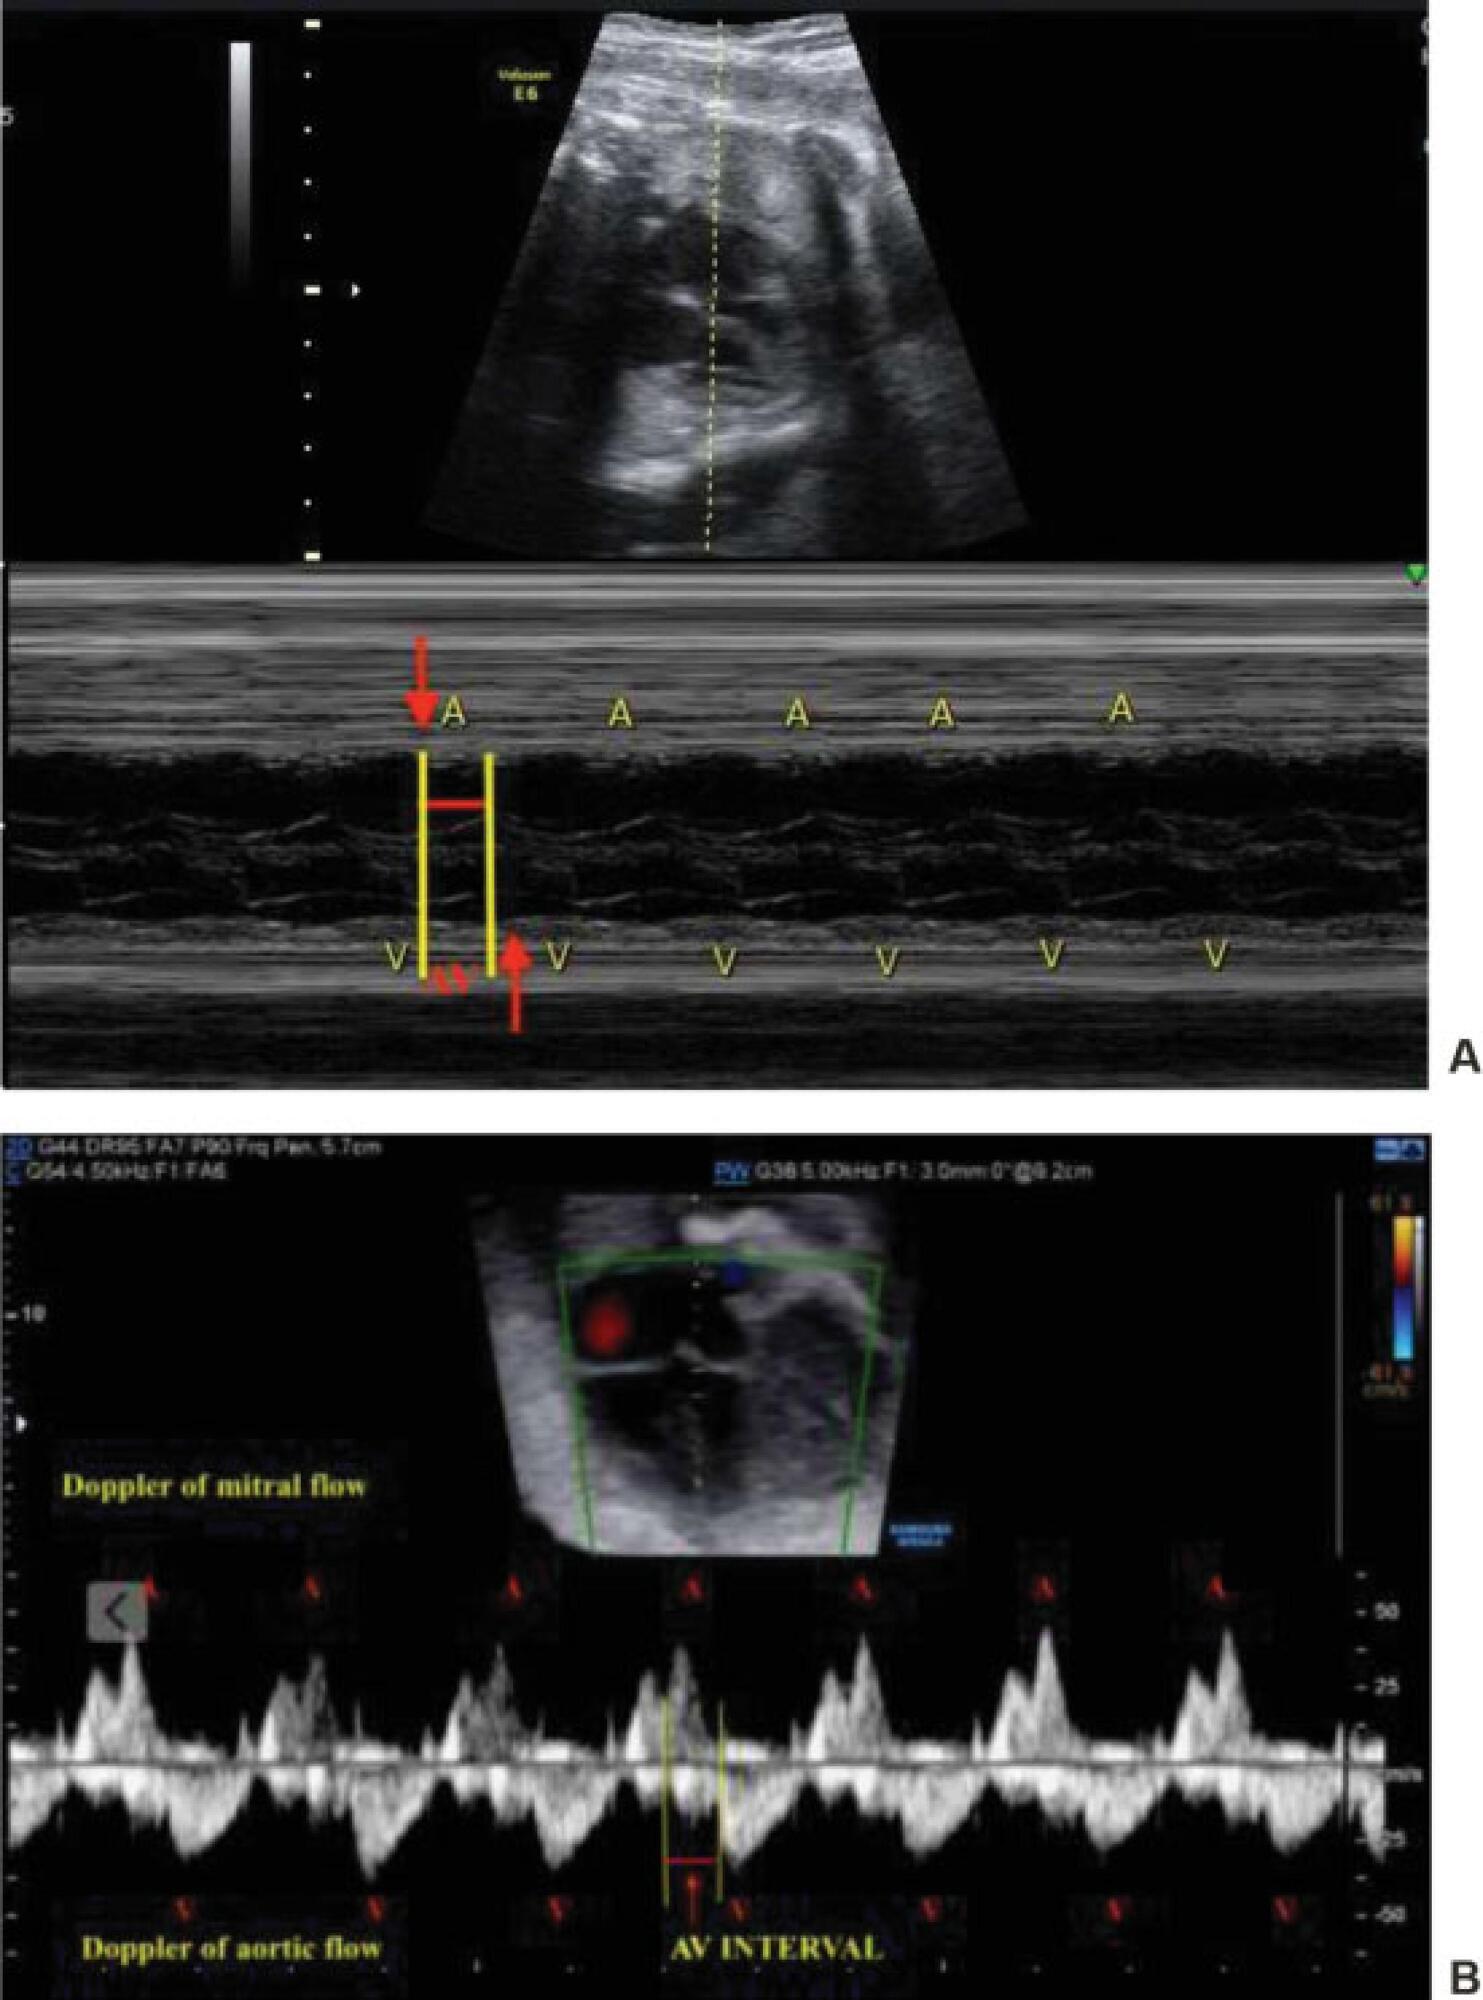 Congenital Complete Atrioventricular Heart Block in a Pregnant Woman with Sjögren Syndrome: Prenatal Care Follow-Up and the Challenge of Intrauterine Treatment